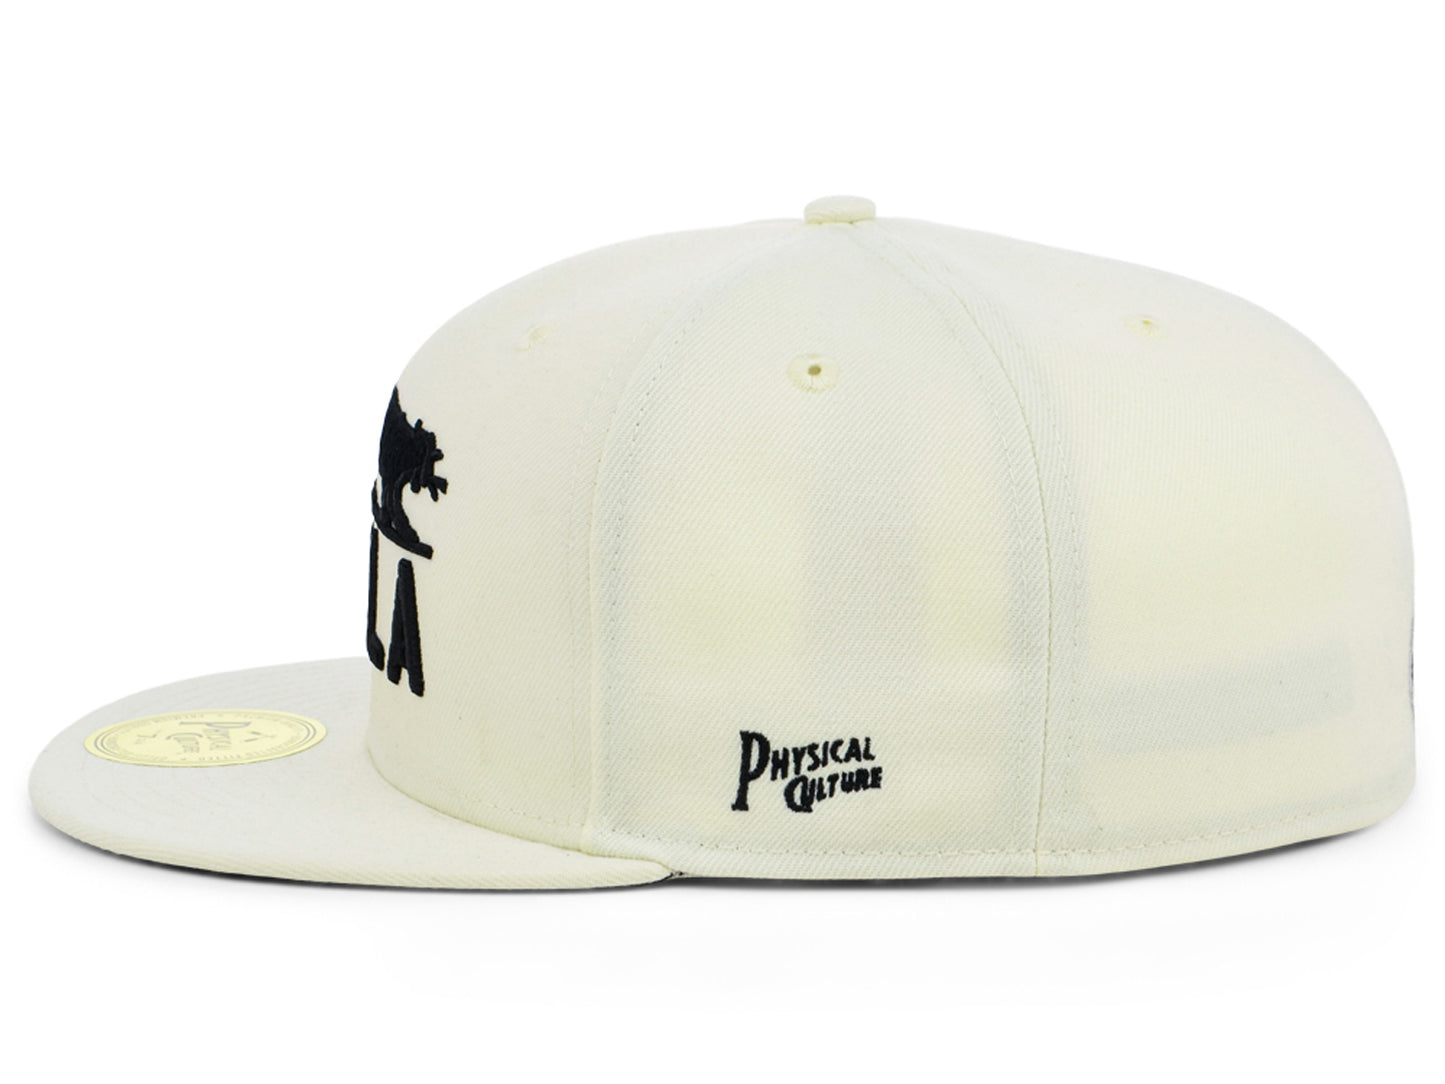 Philadelphia Panthers "PHILA" Fitted Cap